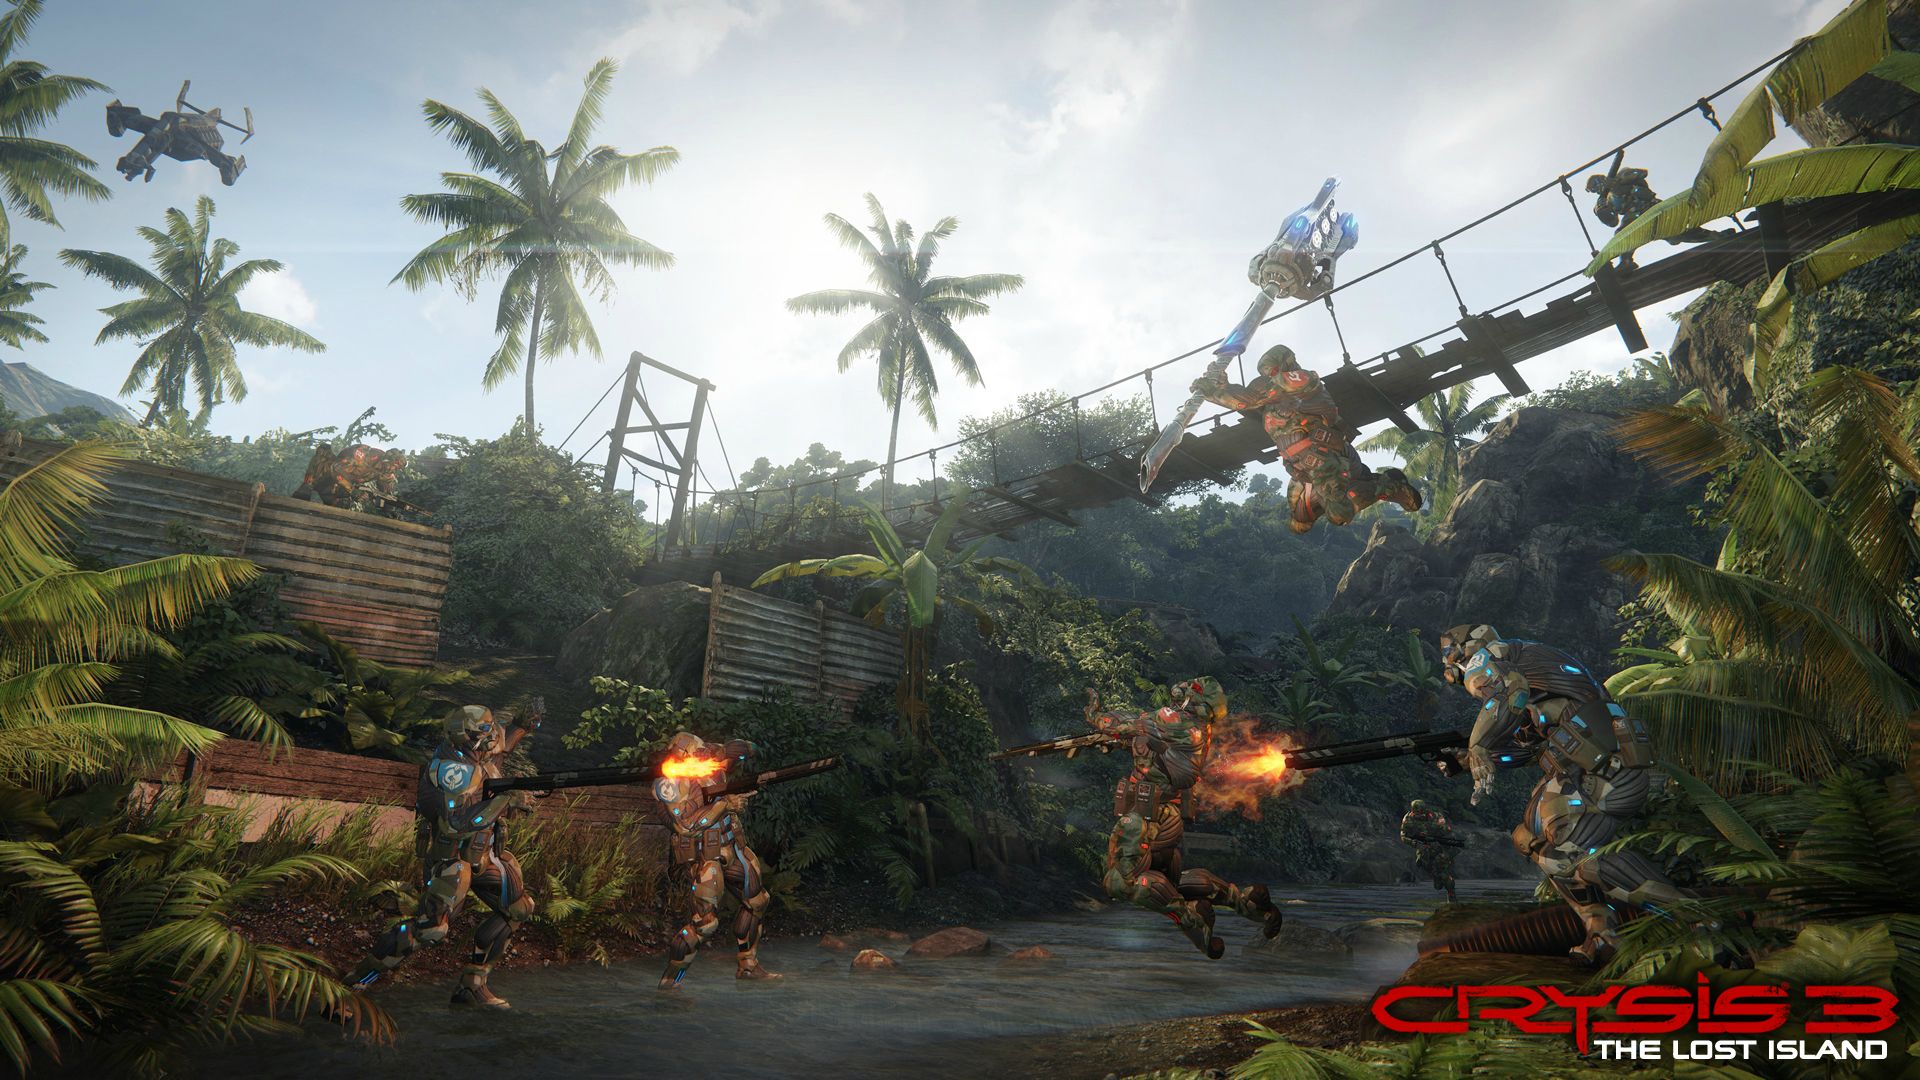 Media asset in full size related to 3dfxzone.it news item entitled as follows: Presentazione e screenshots del DLC Crysis 3: The Lost Island | Image Name: news19611_Crysis-3-The-Lost-Island_3.jpg